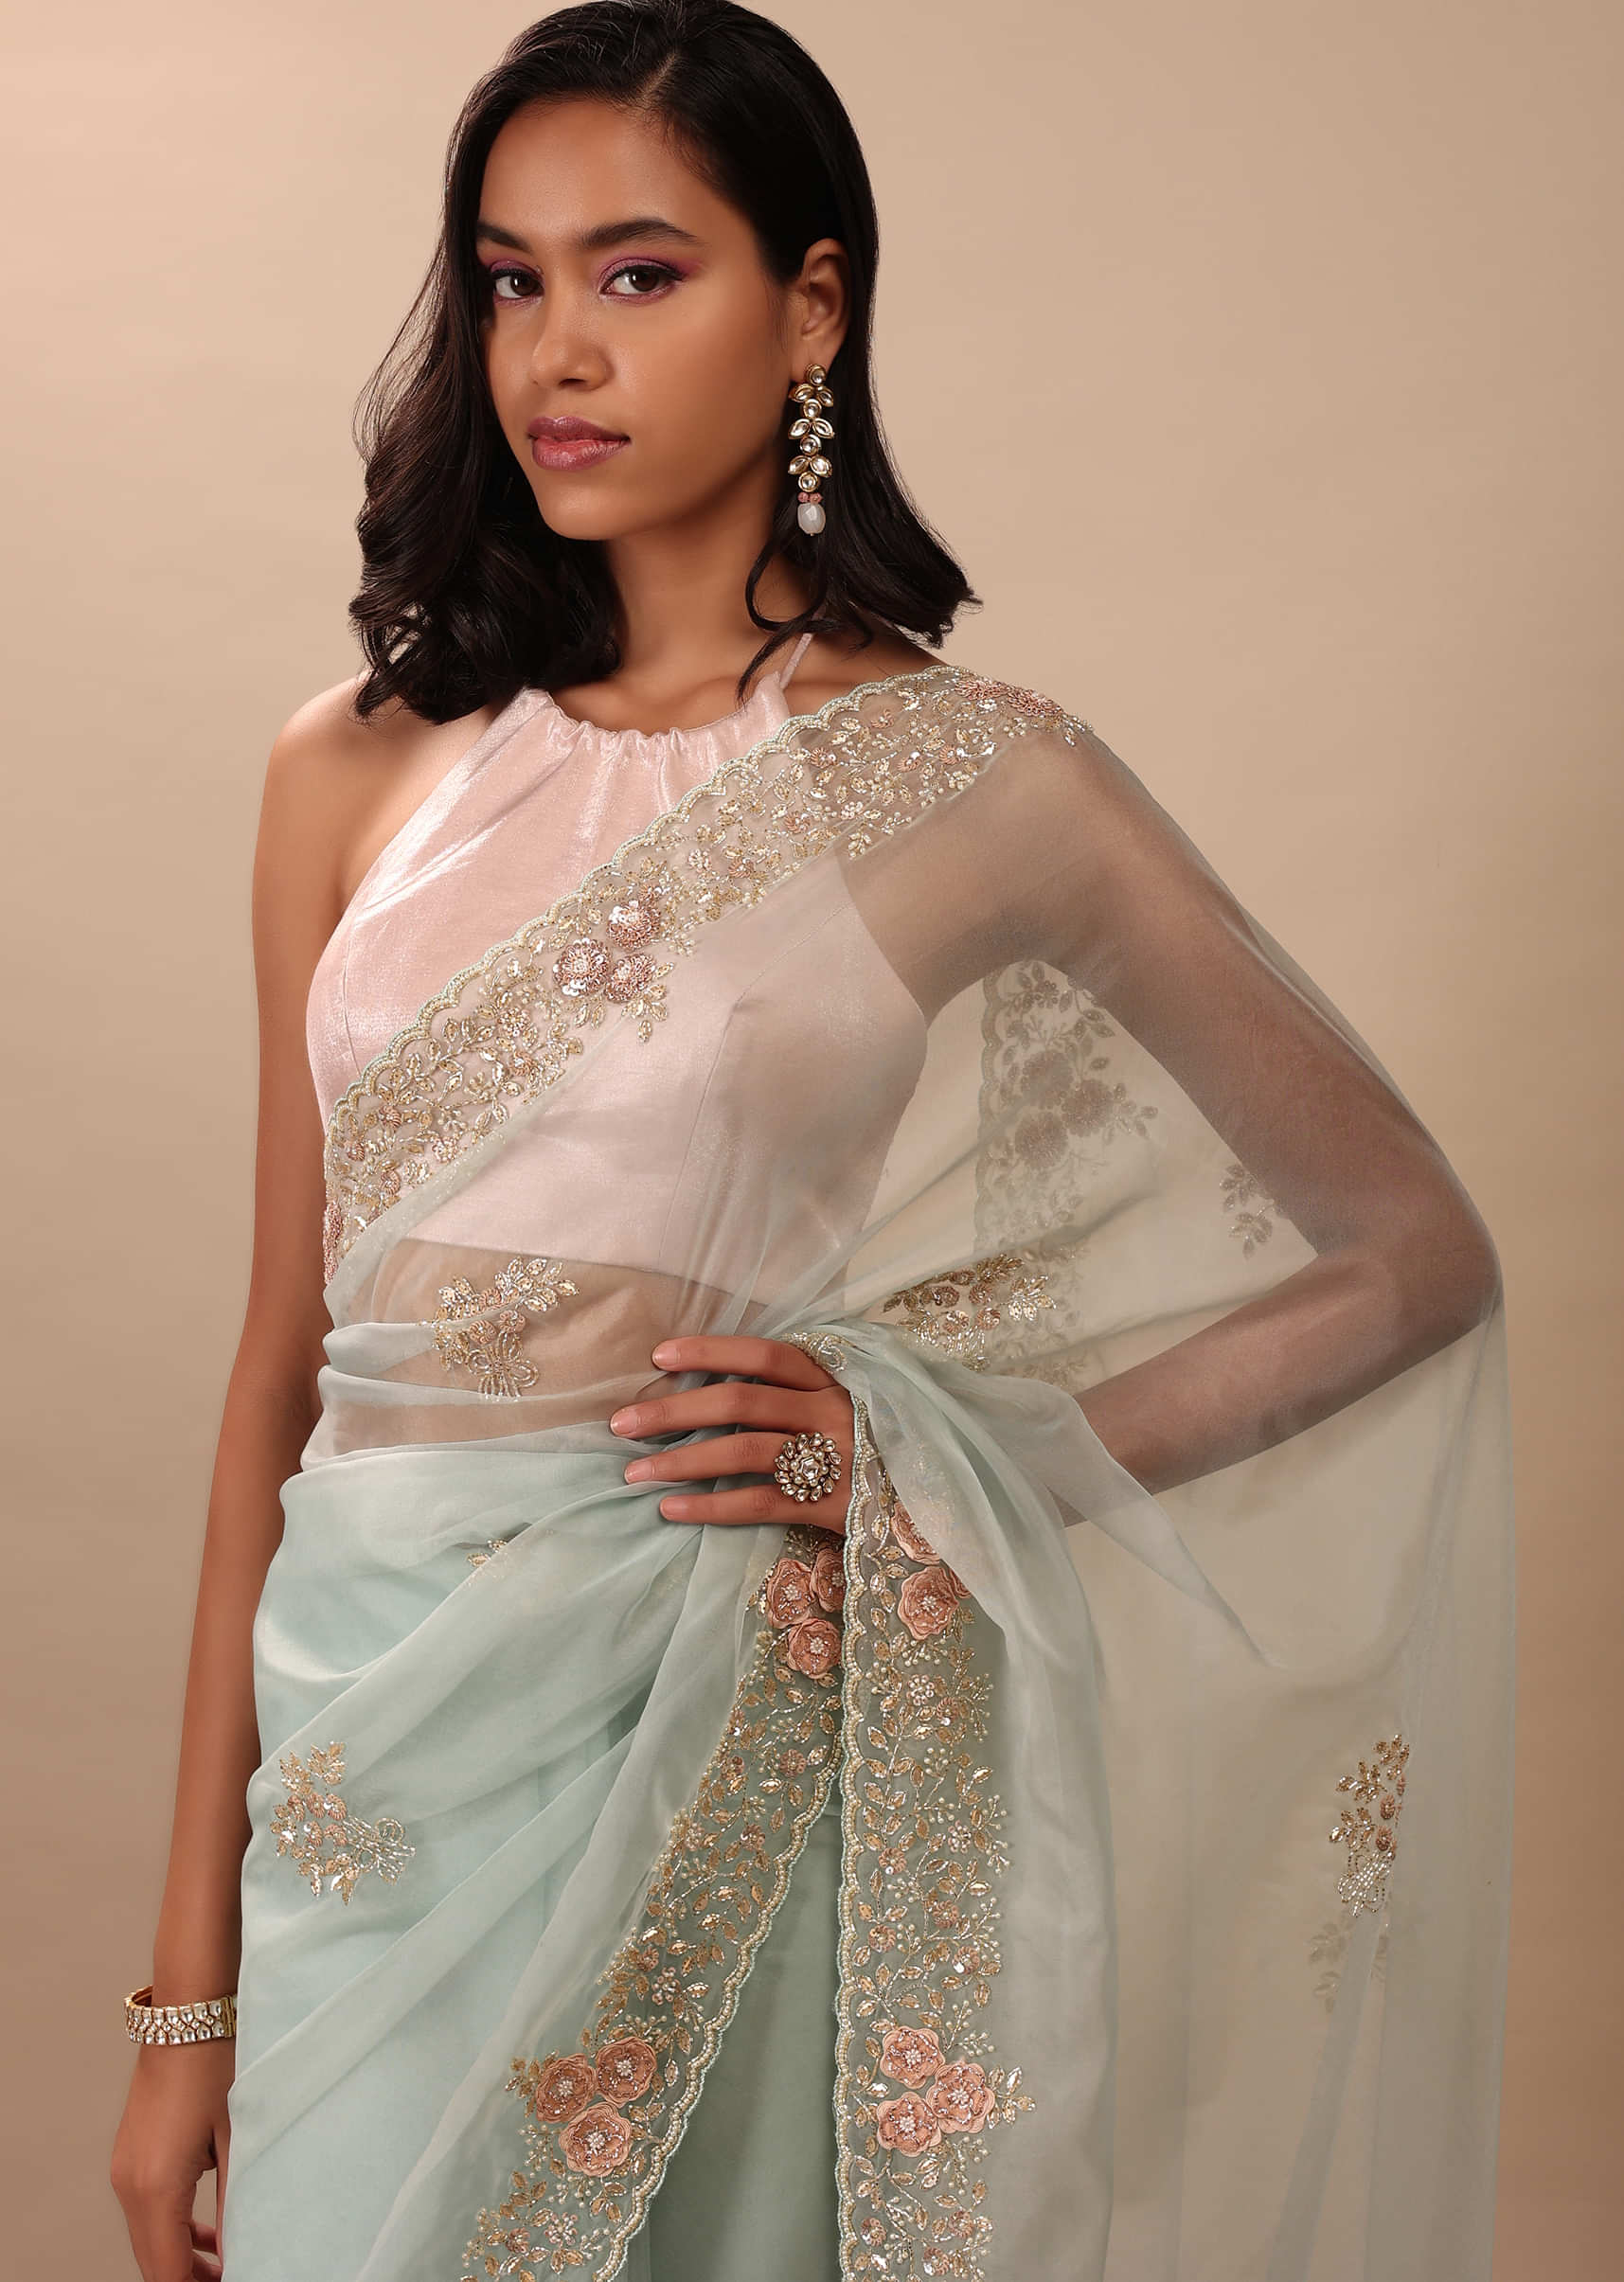 Sky Blue Saree In Organza With 3D Floral Embroidery In Pearls And Cut Dana